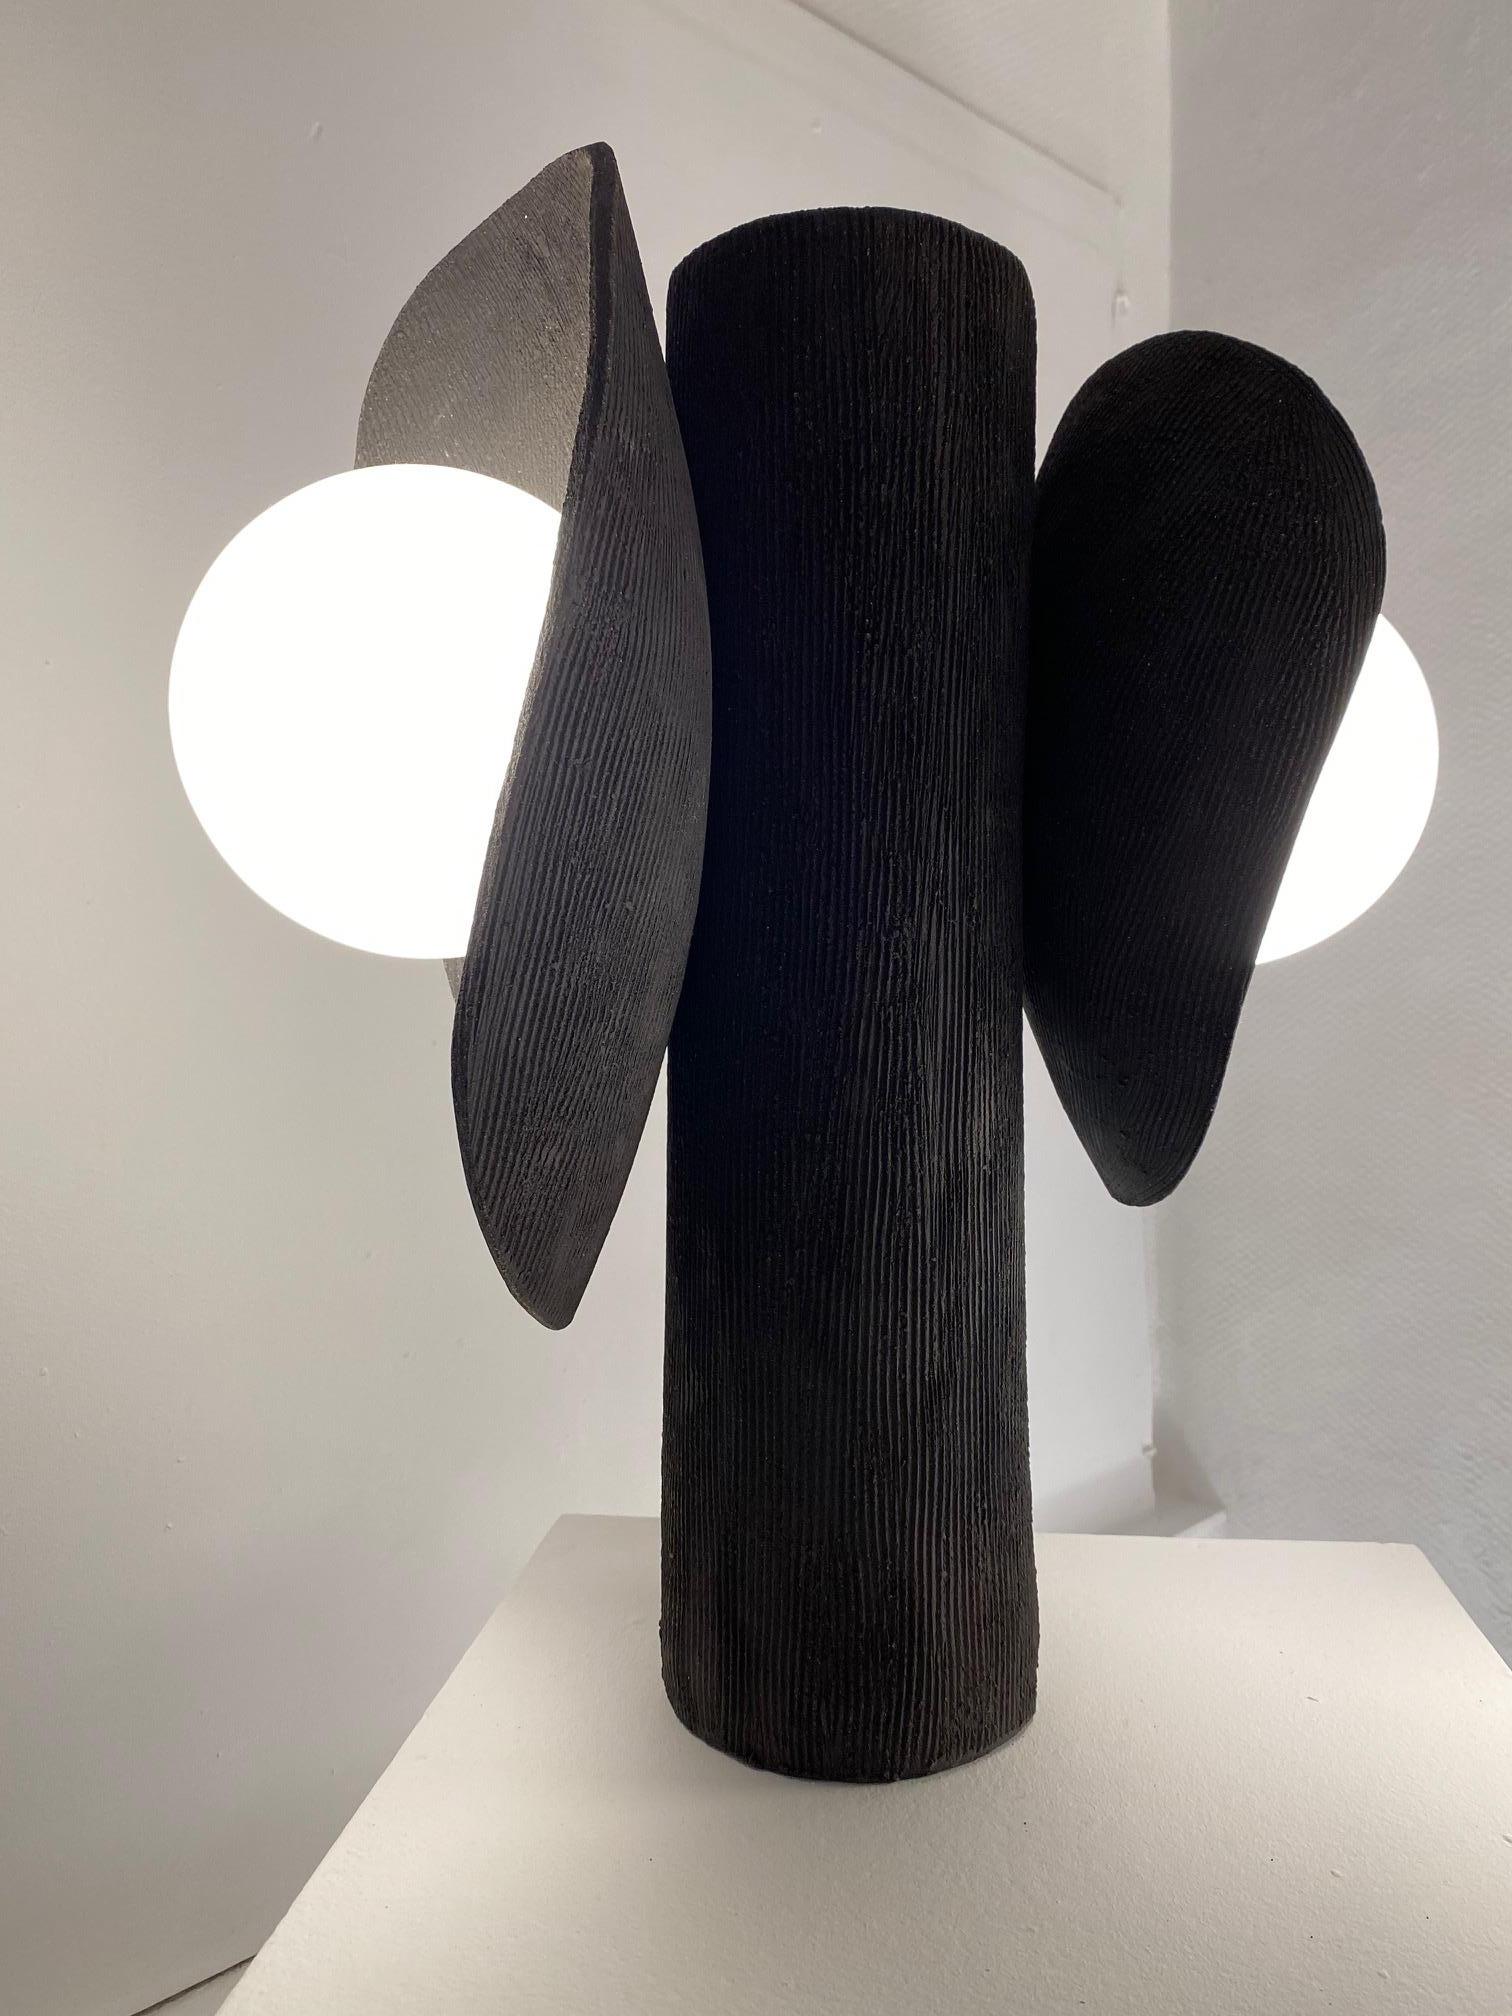 Ceramic lamp by Olivia Cognet
Materials: ceramic
Dimensions: H around 50-60 cm tall 

Each of Olivia’s handmade creations is a unique work of art, the snapshot of a precious moment captured in a world of fast ‘everything’.
Since moving to Los